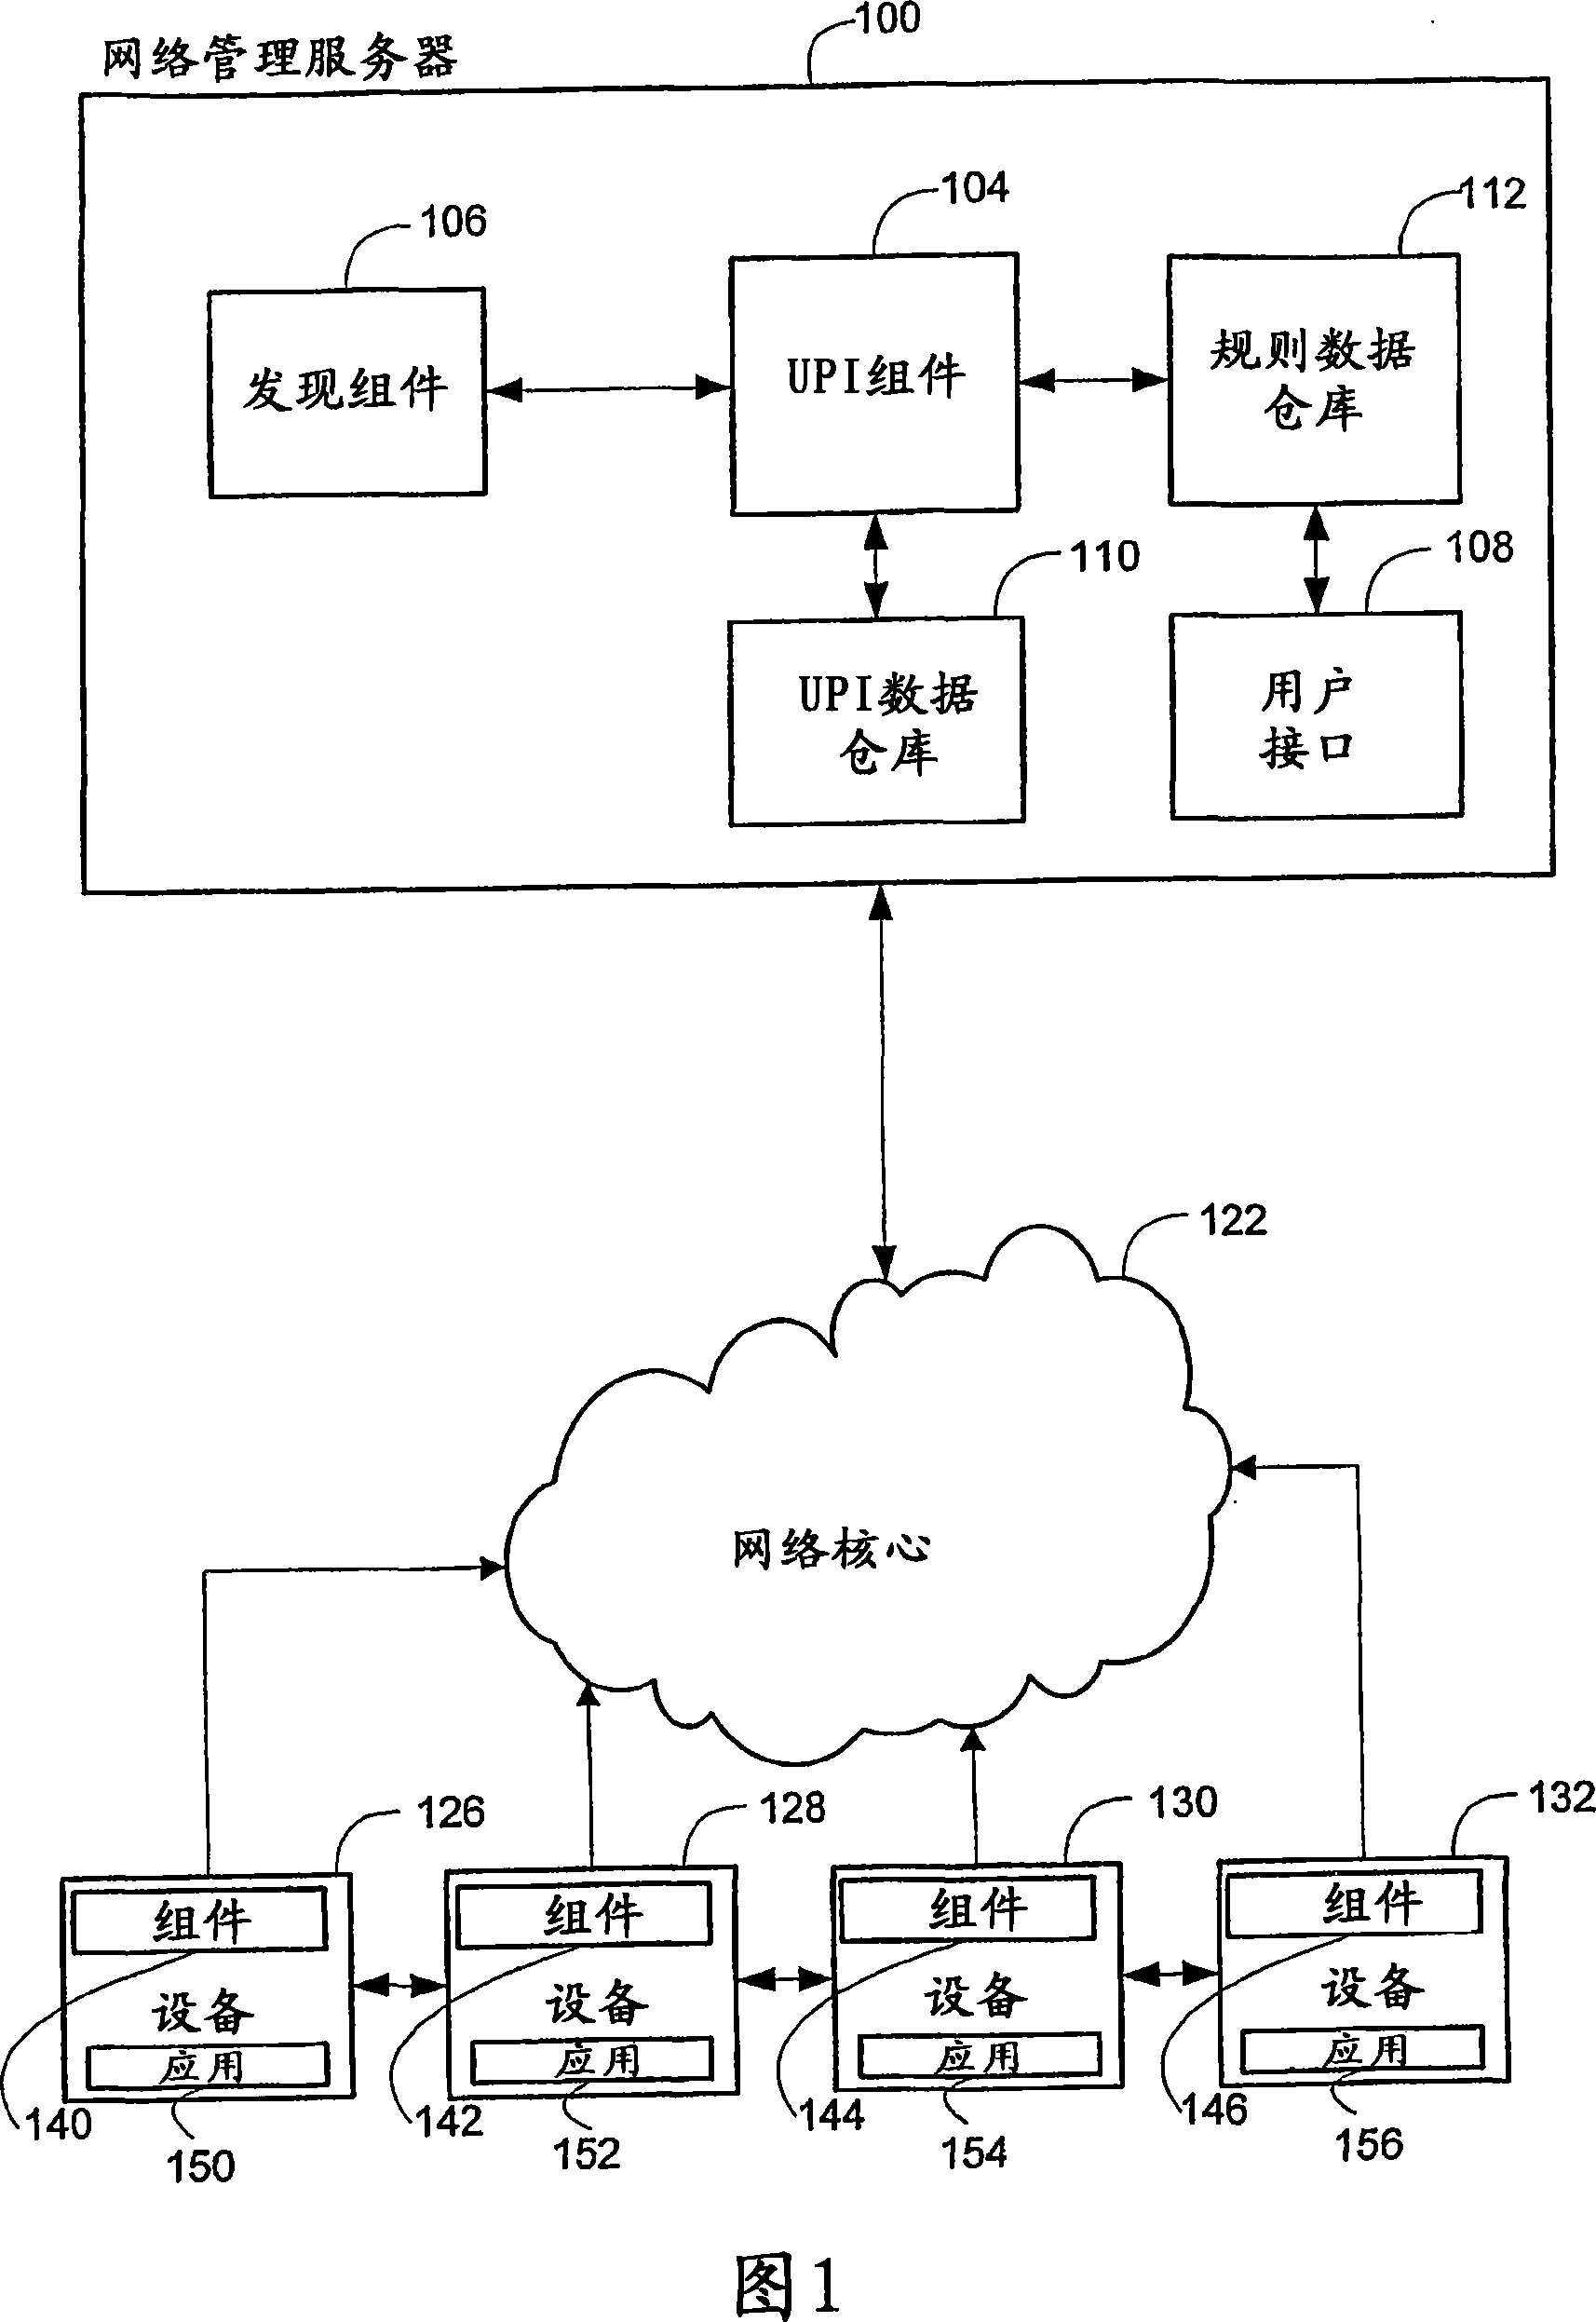 System and method for generating unique and persistent identifiers